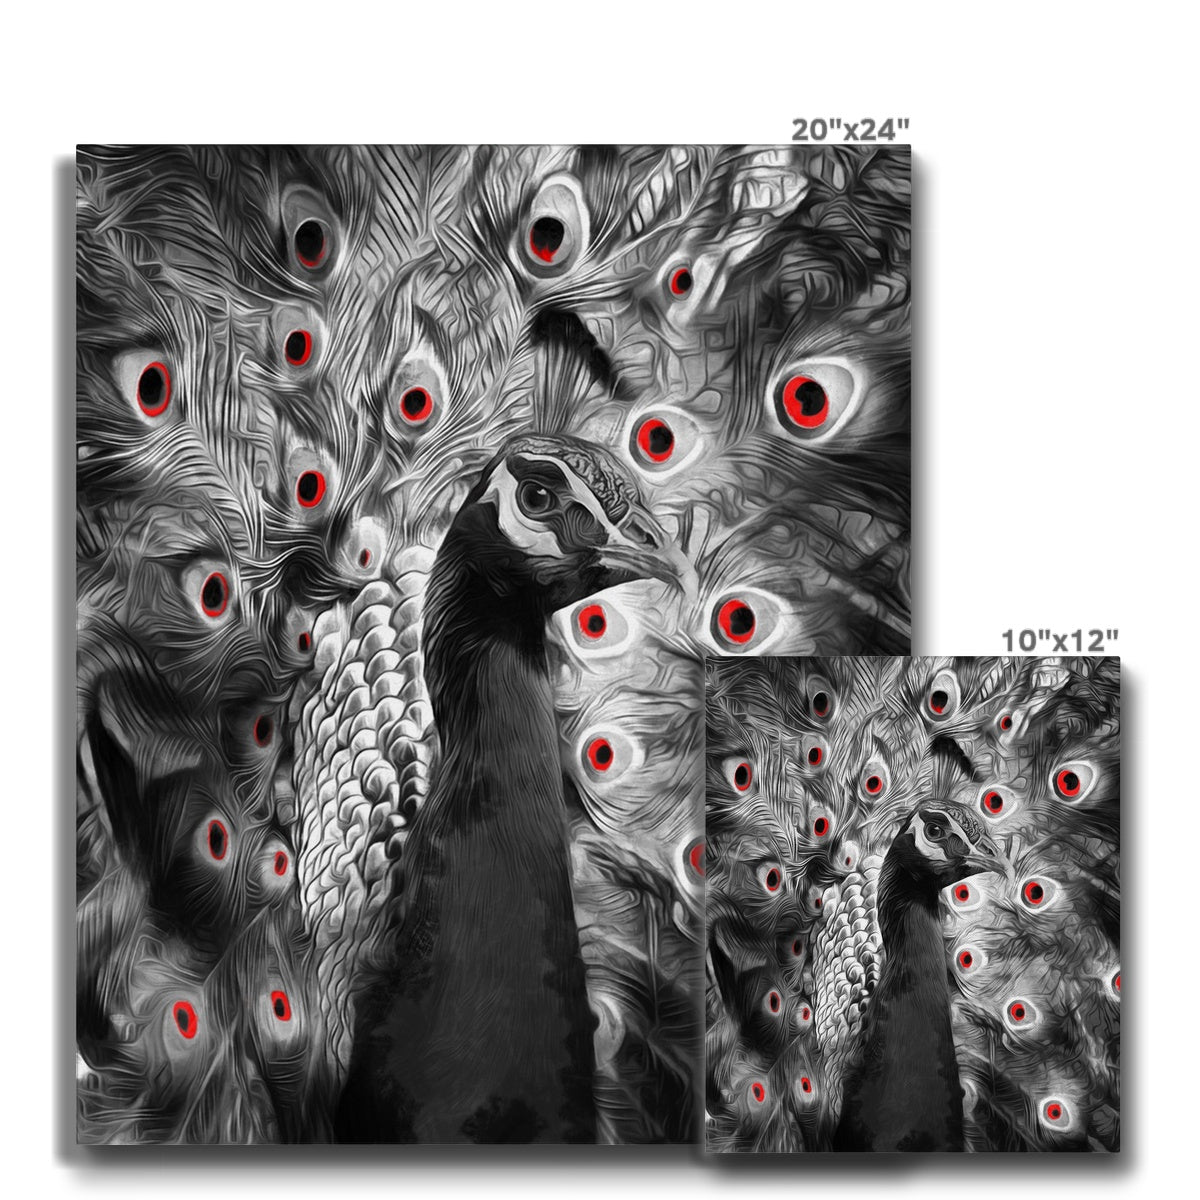 Greyscale Peacock Painting Canvas